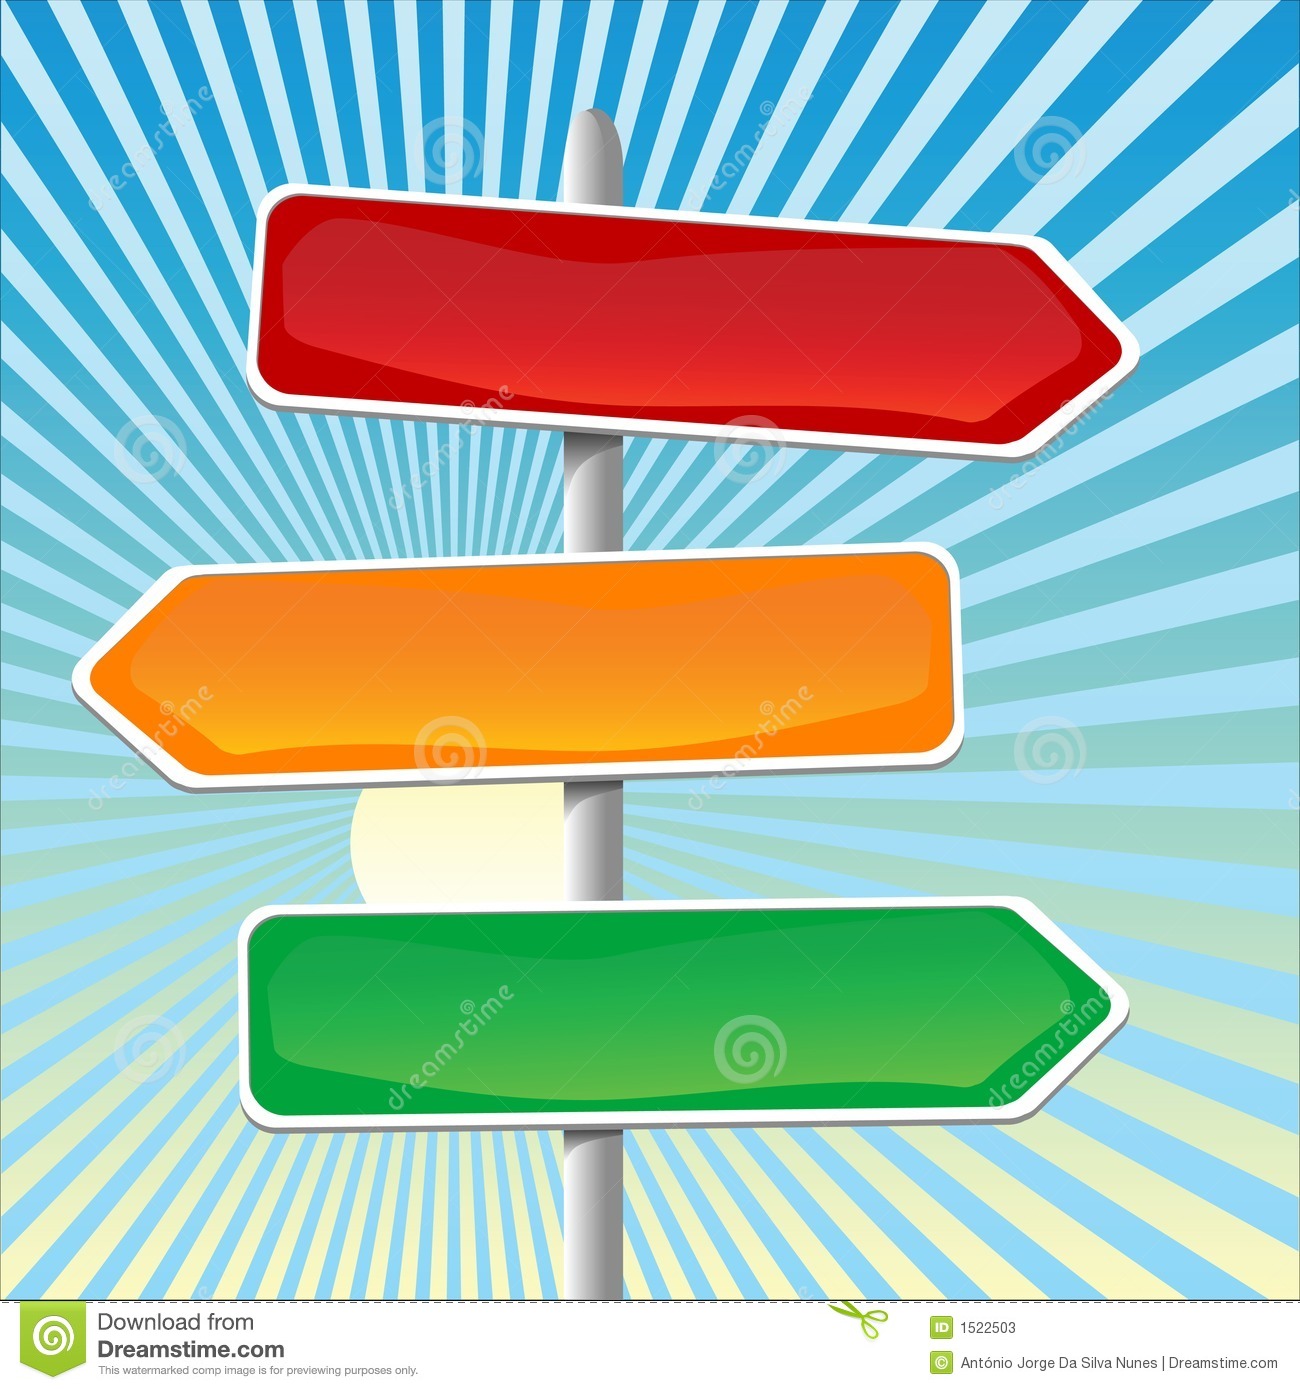 Illustration Of Direction Signs With Suburst Background  Vector